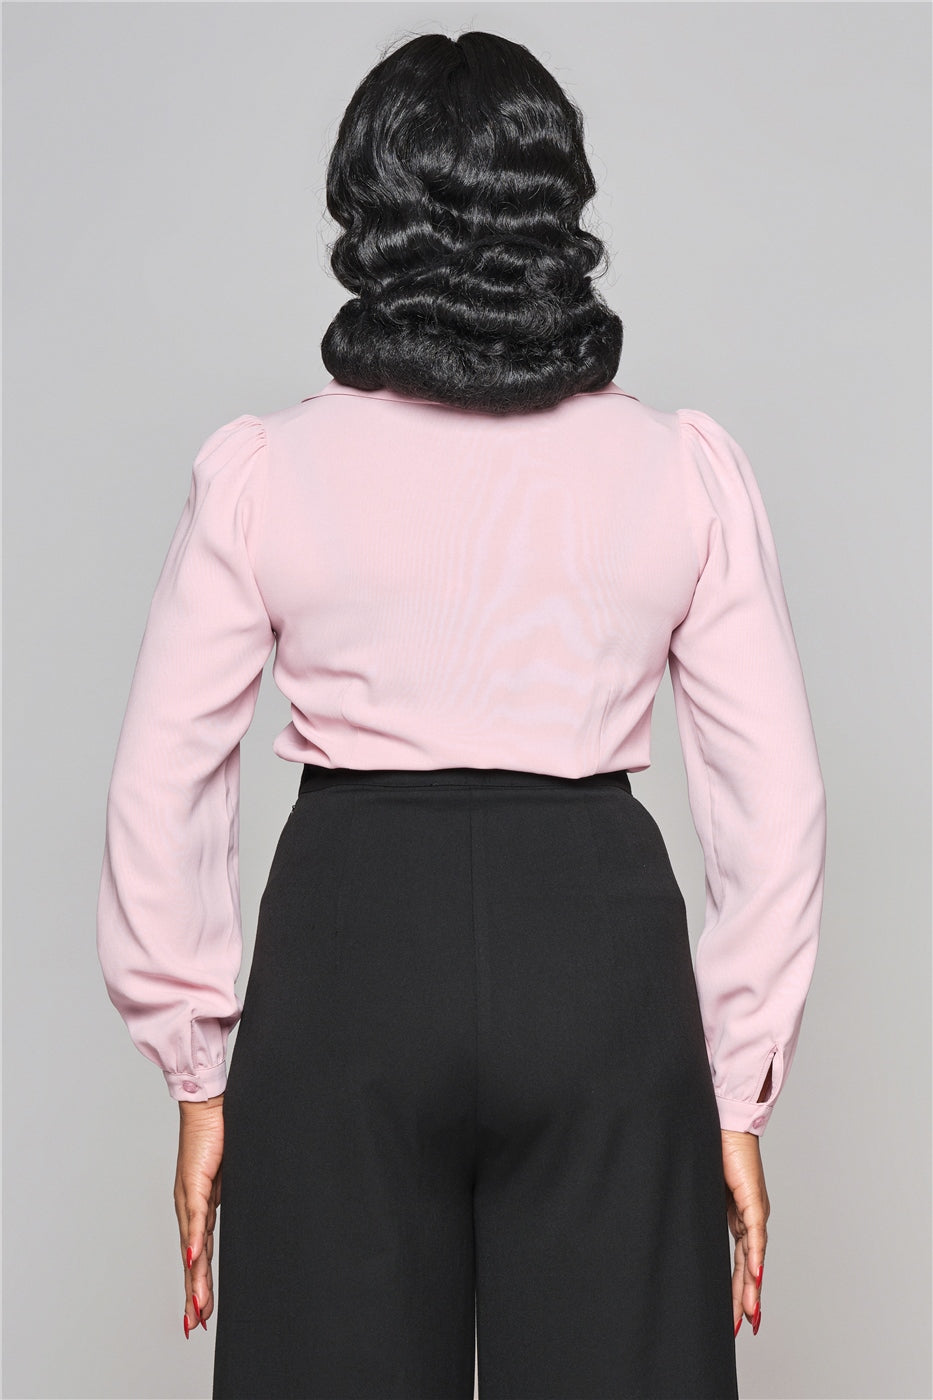 Woman facing away from the camera with black hair in finger waves, wearing a long sleeved pink blouse and high waisted trousers.